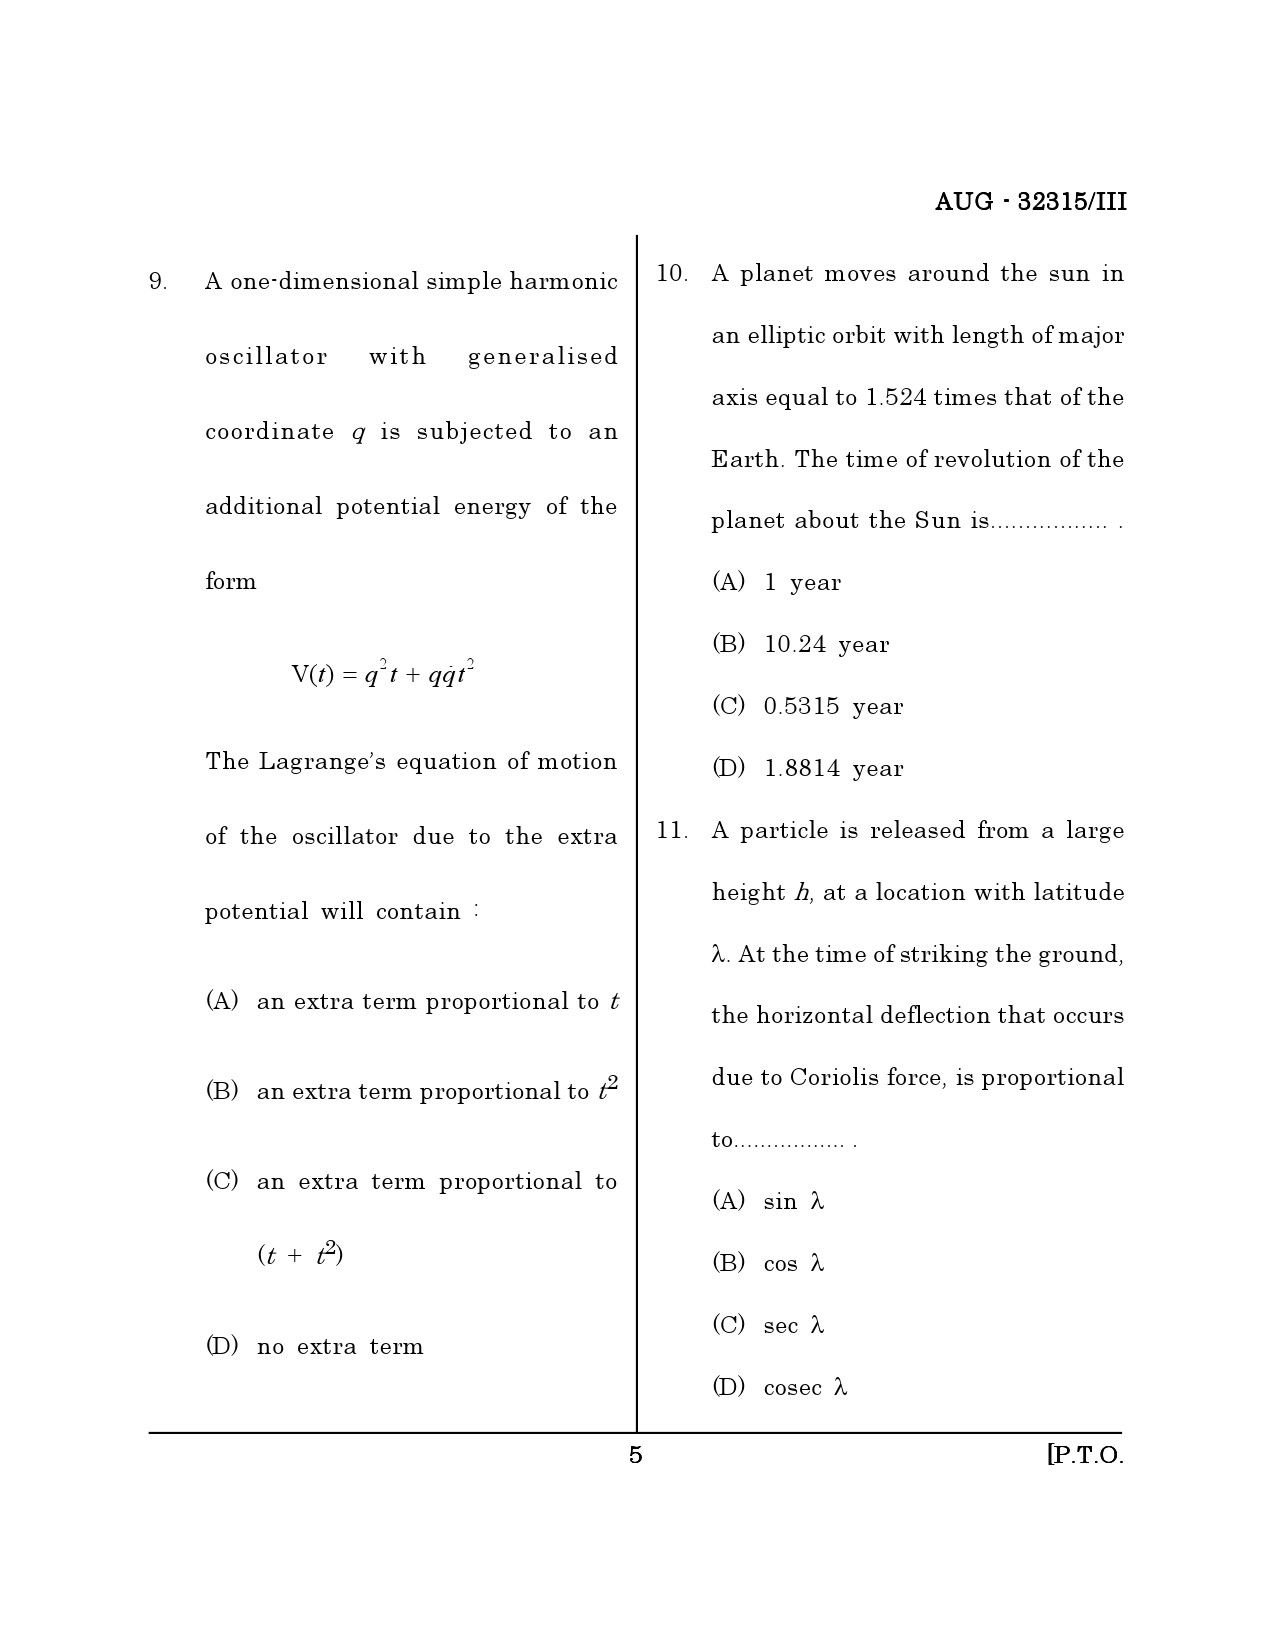 Maharashtra SET Physical Science Question Paper III August 2015 4